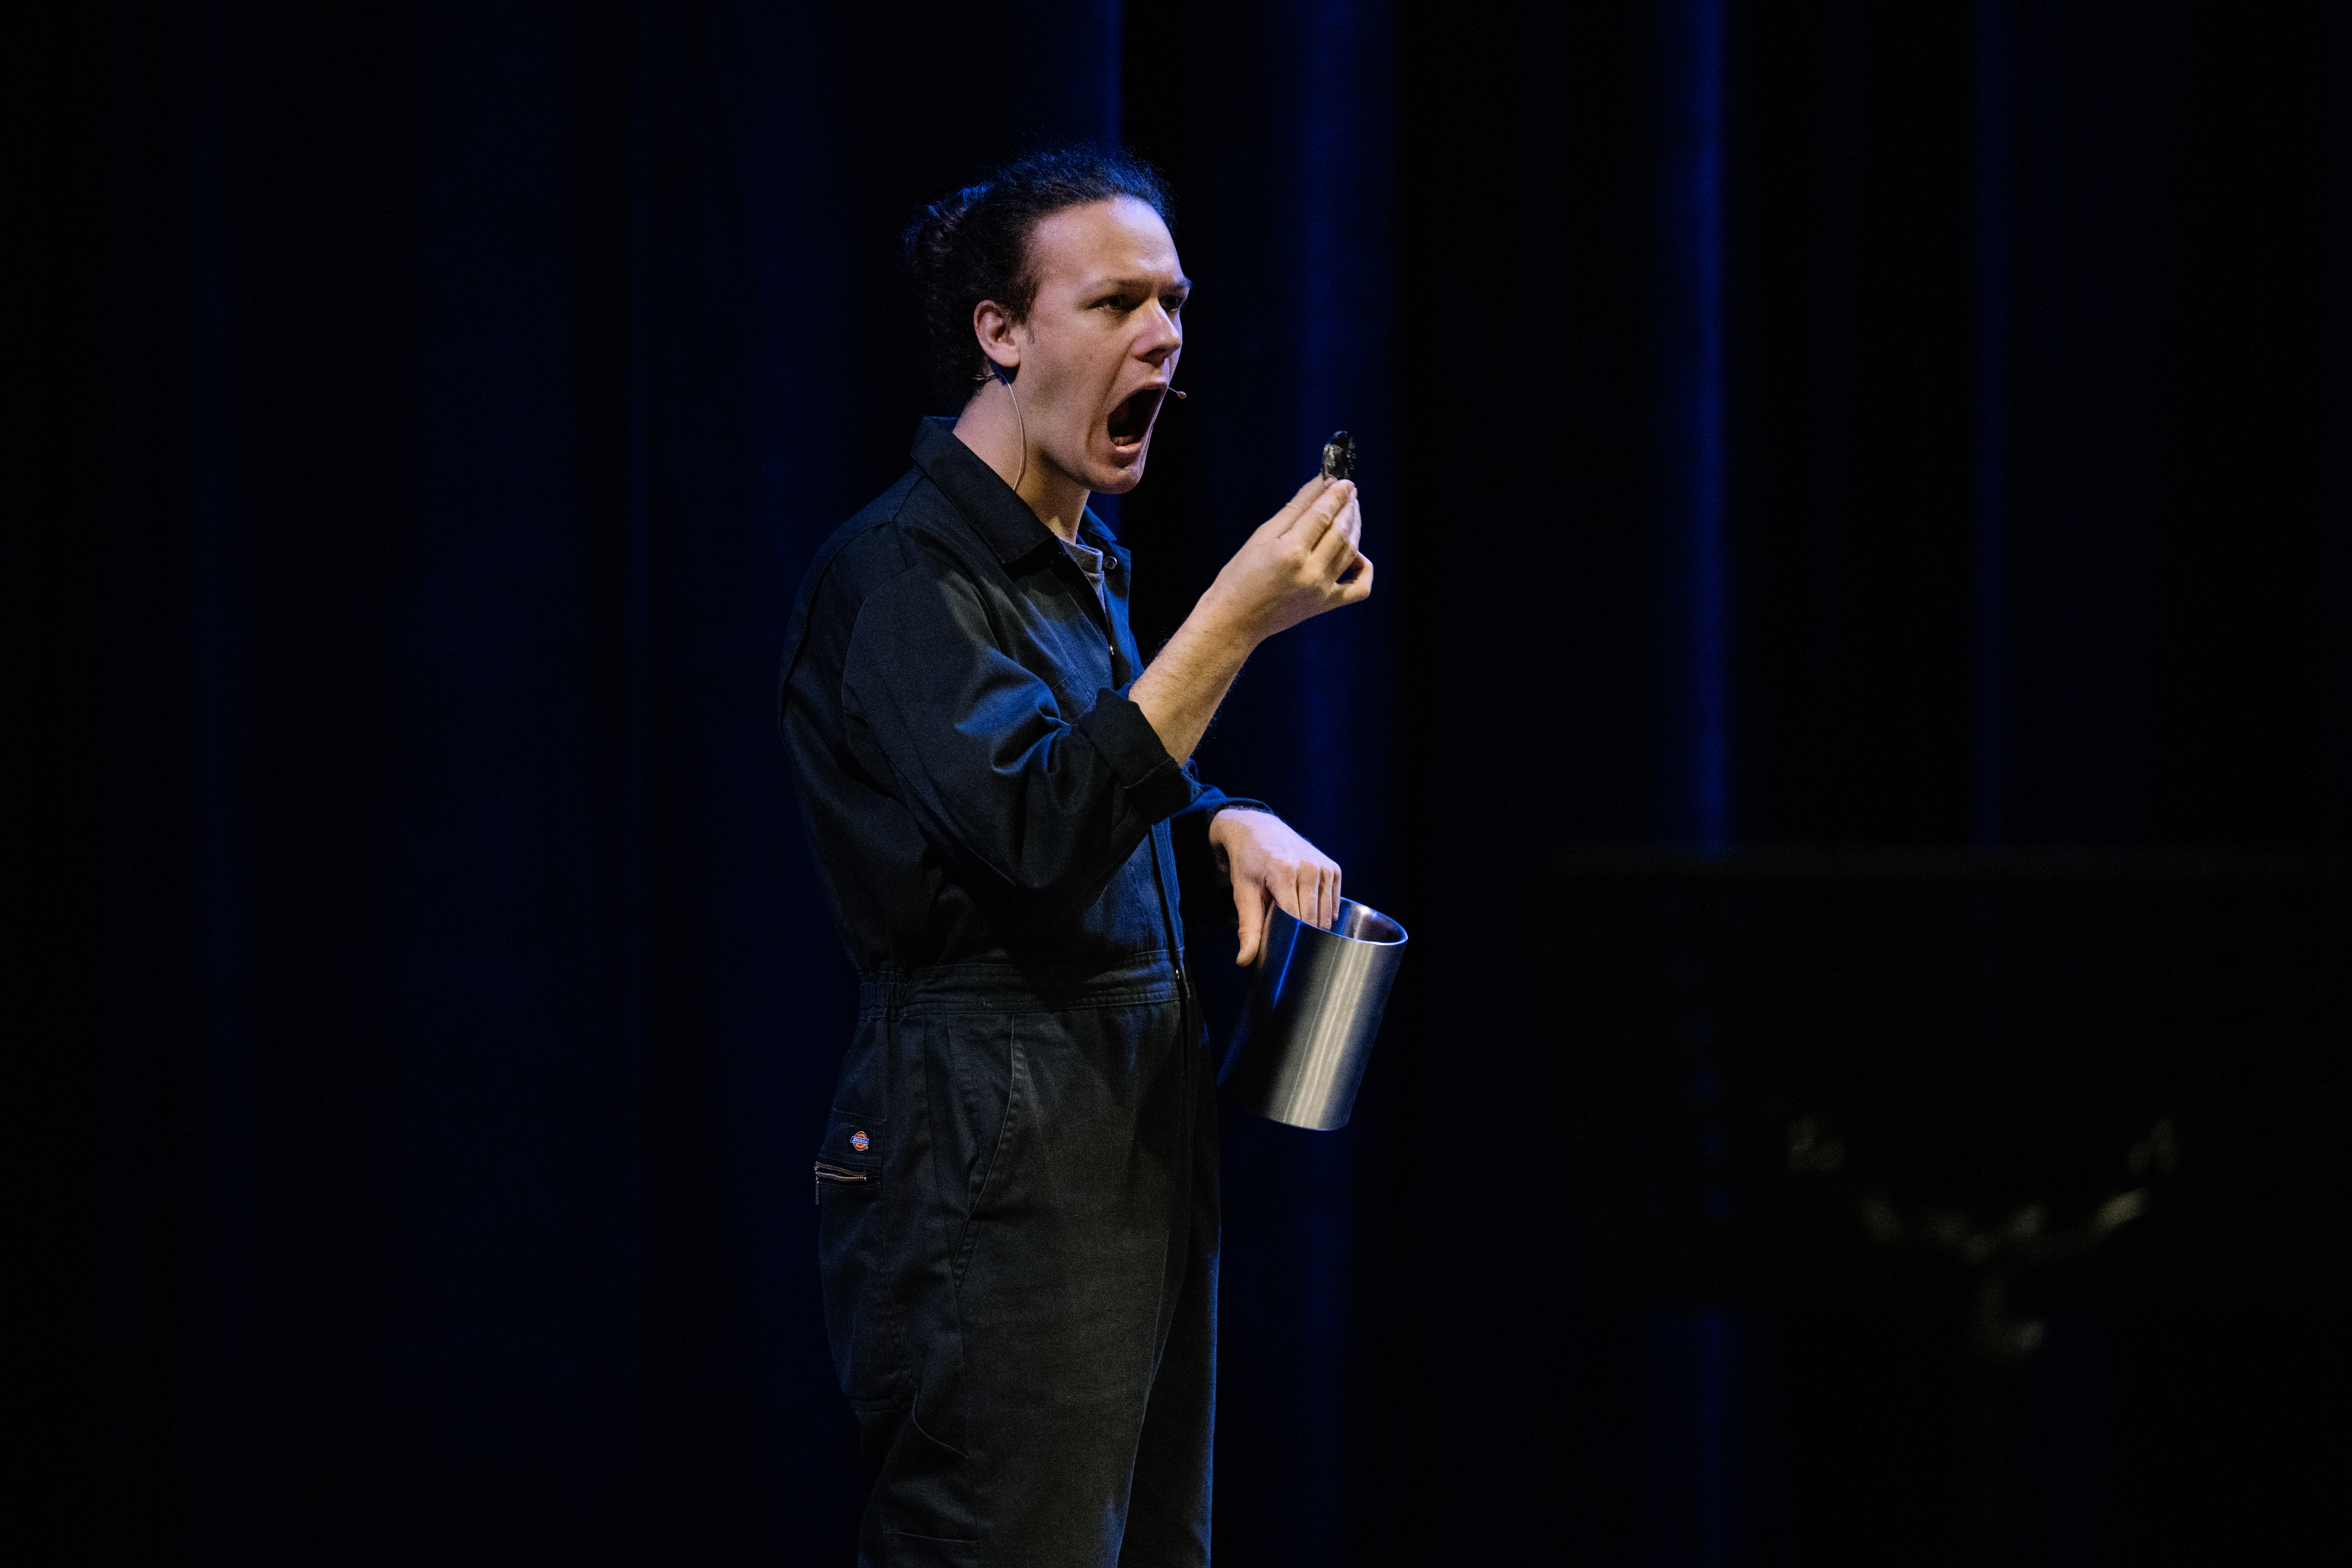 A photo of a person standing on stage in a black boiler suit holding a silver container in one hand holding a gold coin shaped object in the other. Their mouth is open as if they might eat the coin.